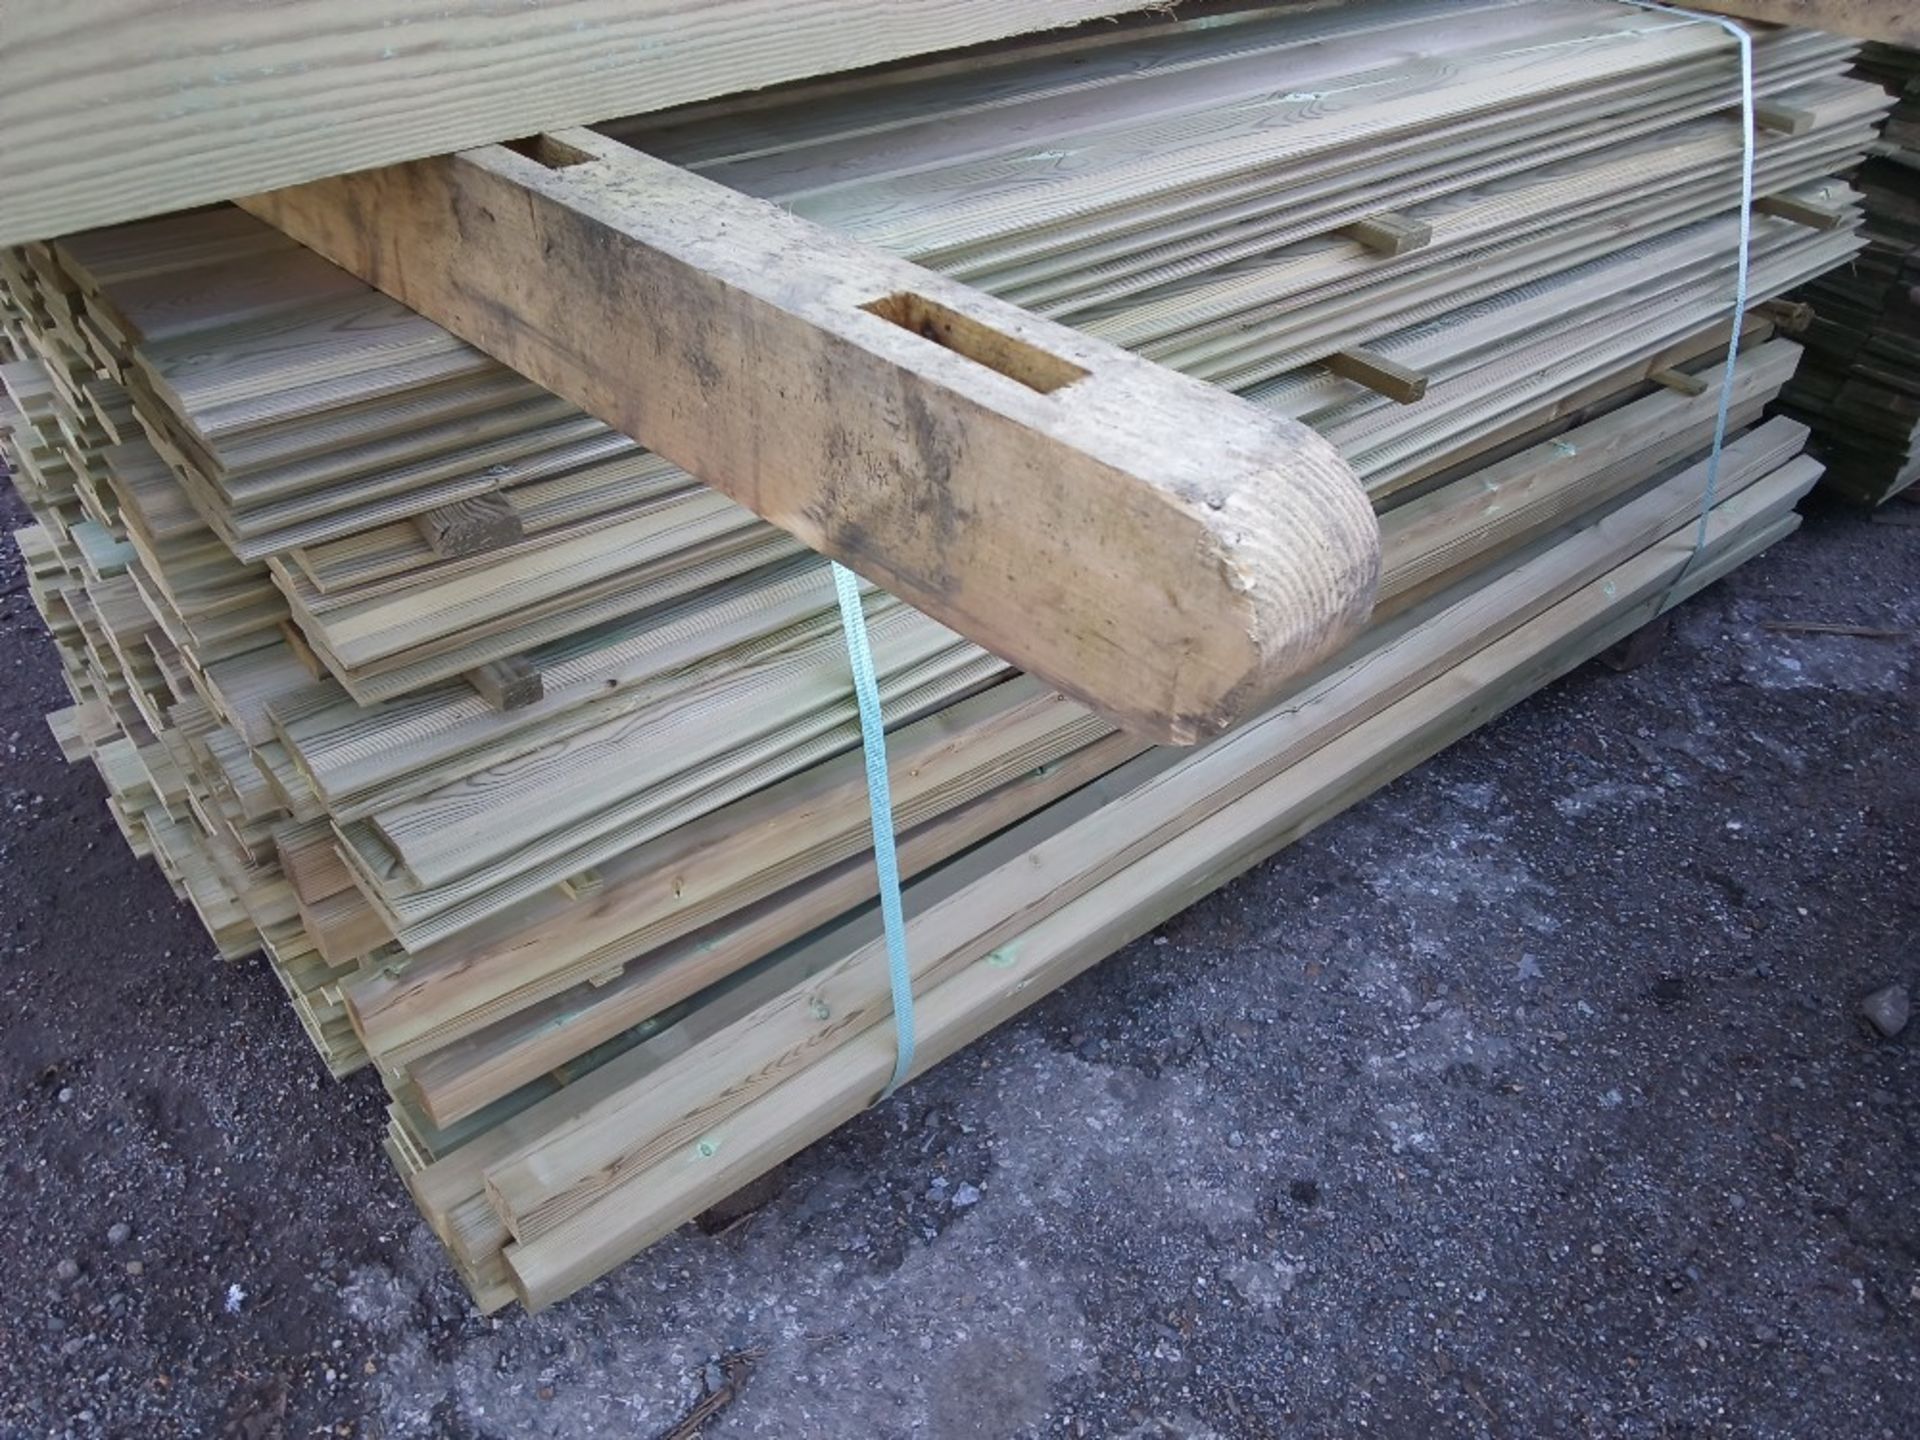 LARGE PACK OF TREATED SHIPLAP CLADDING TIMBER BOARDS: 1.8M LENGTH X 100MM WIDTH APPROX. - Image 3 of 3